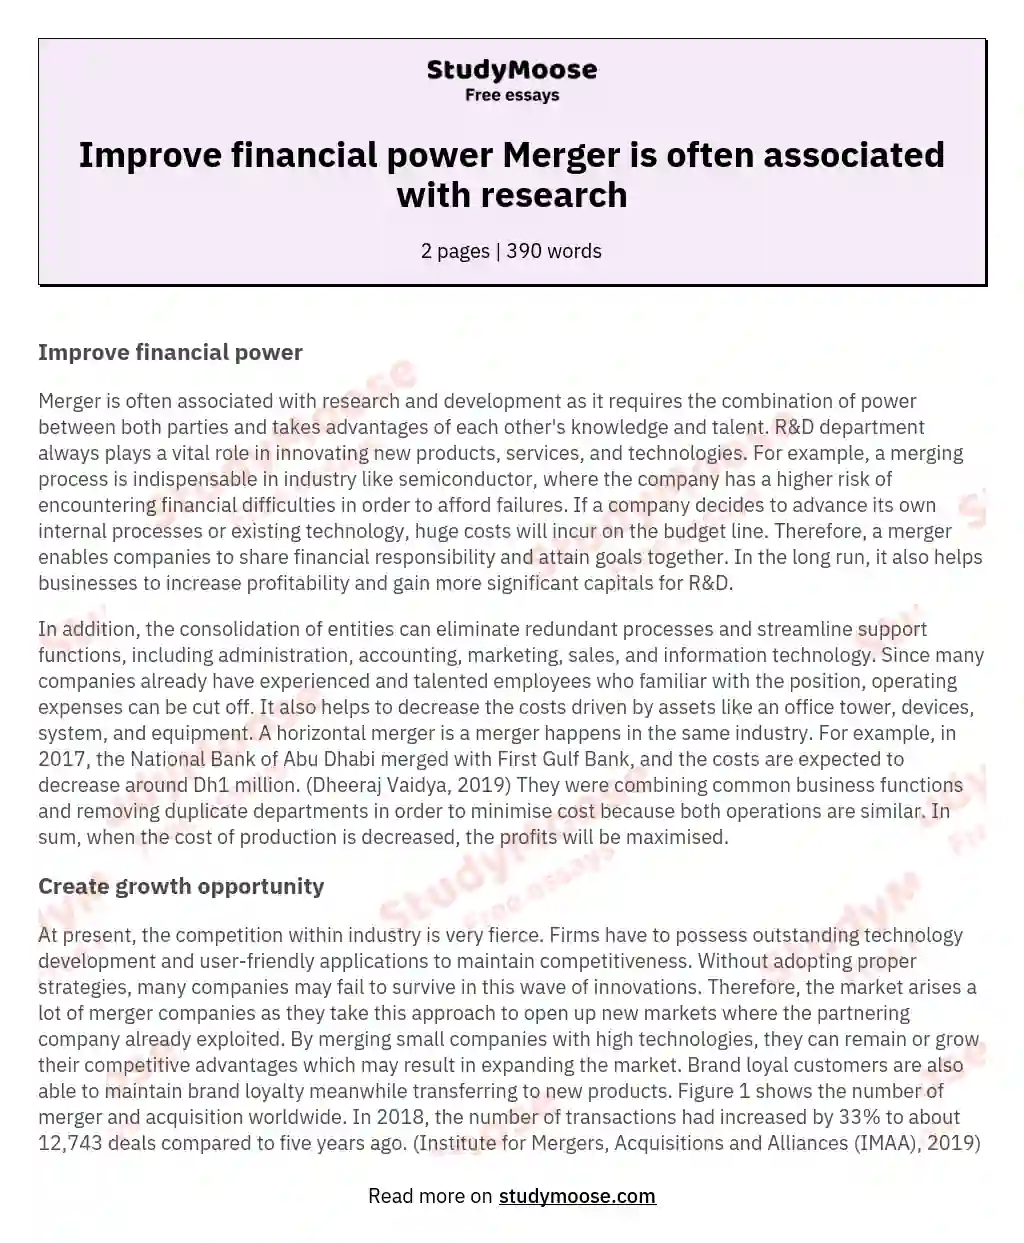 Improve financial power Merger is often associated with research essay